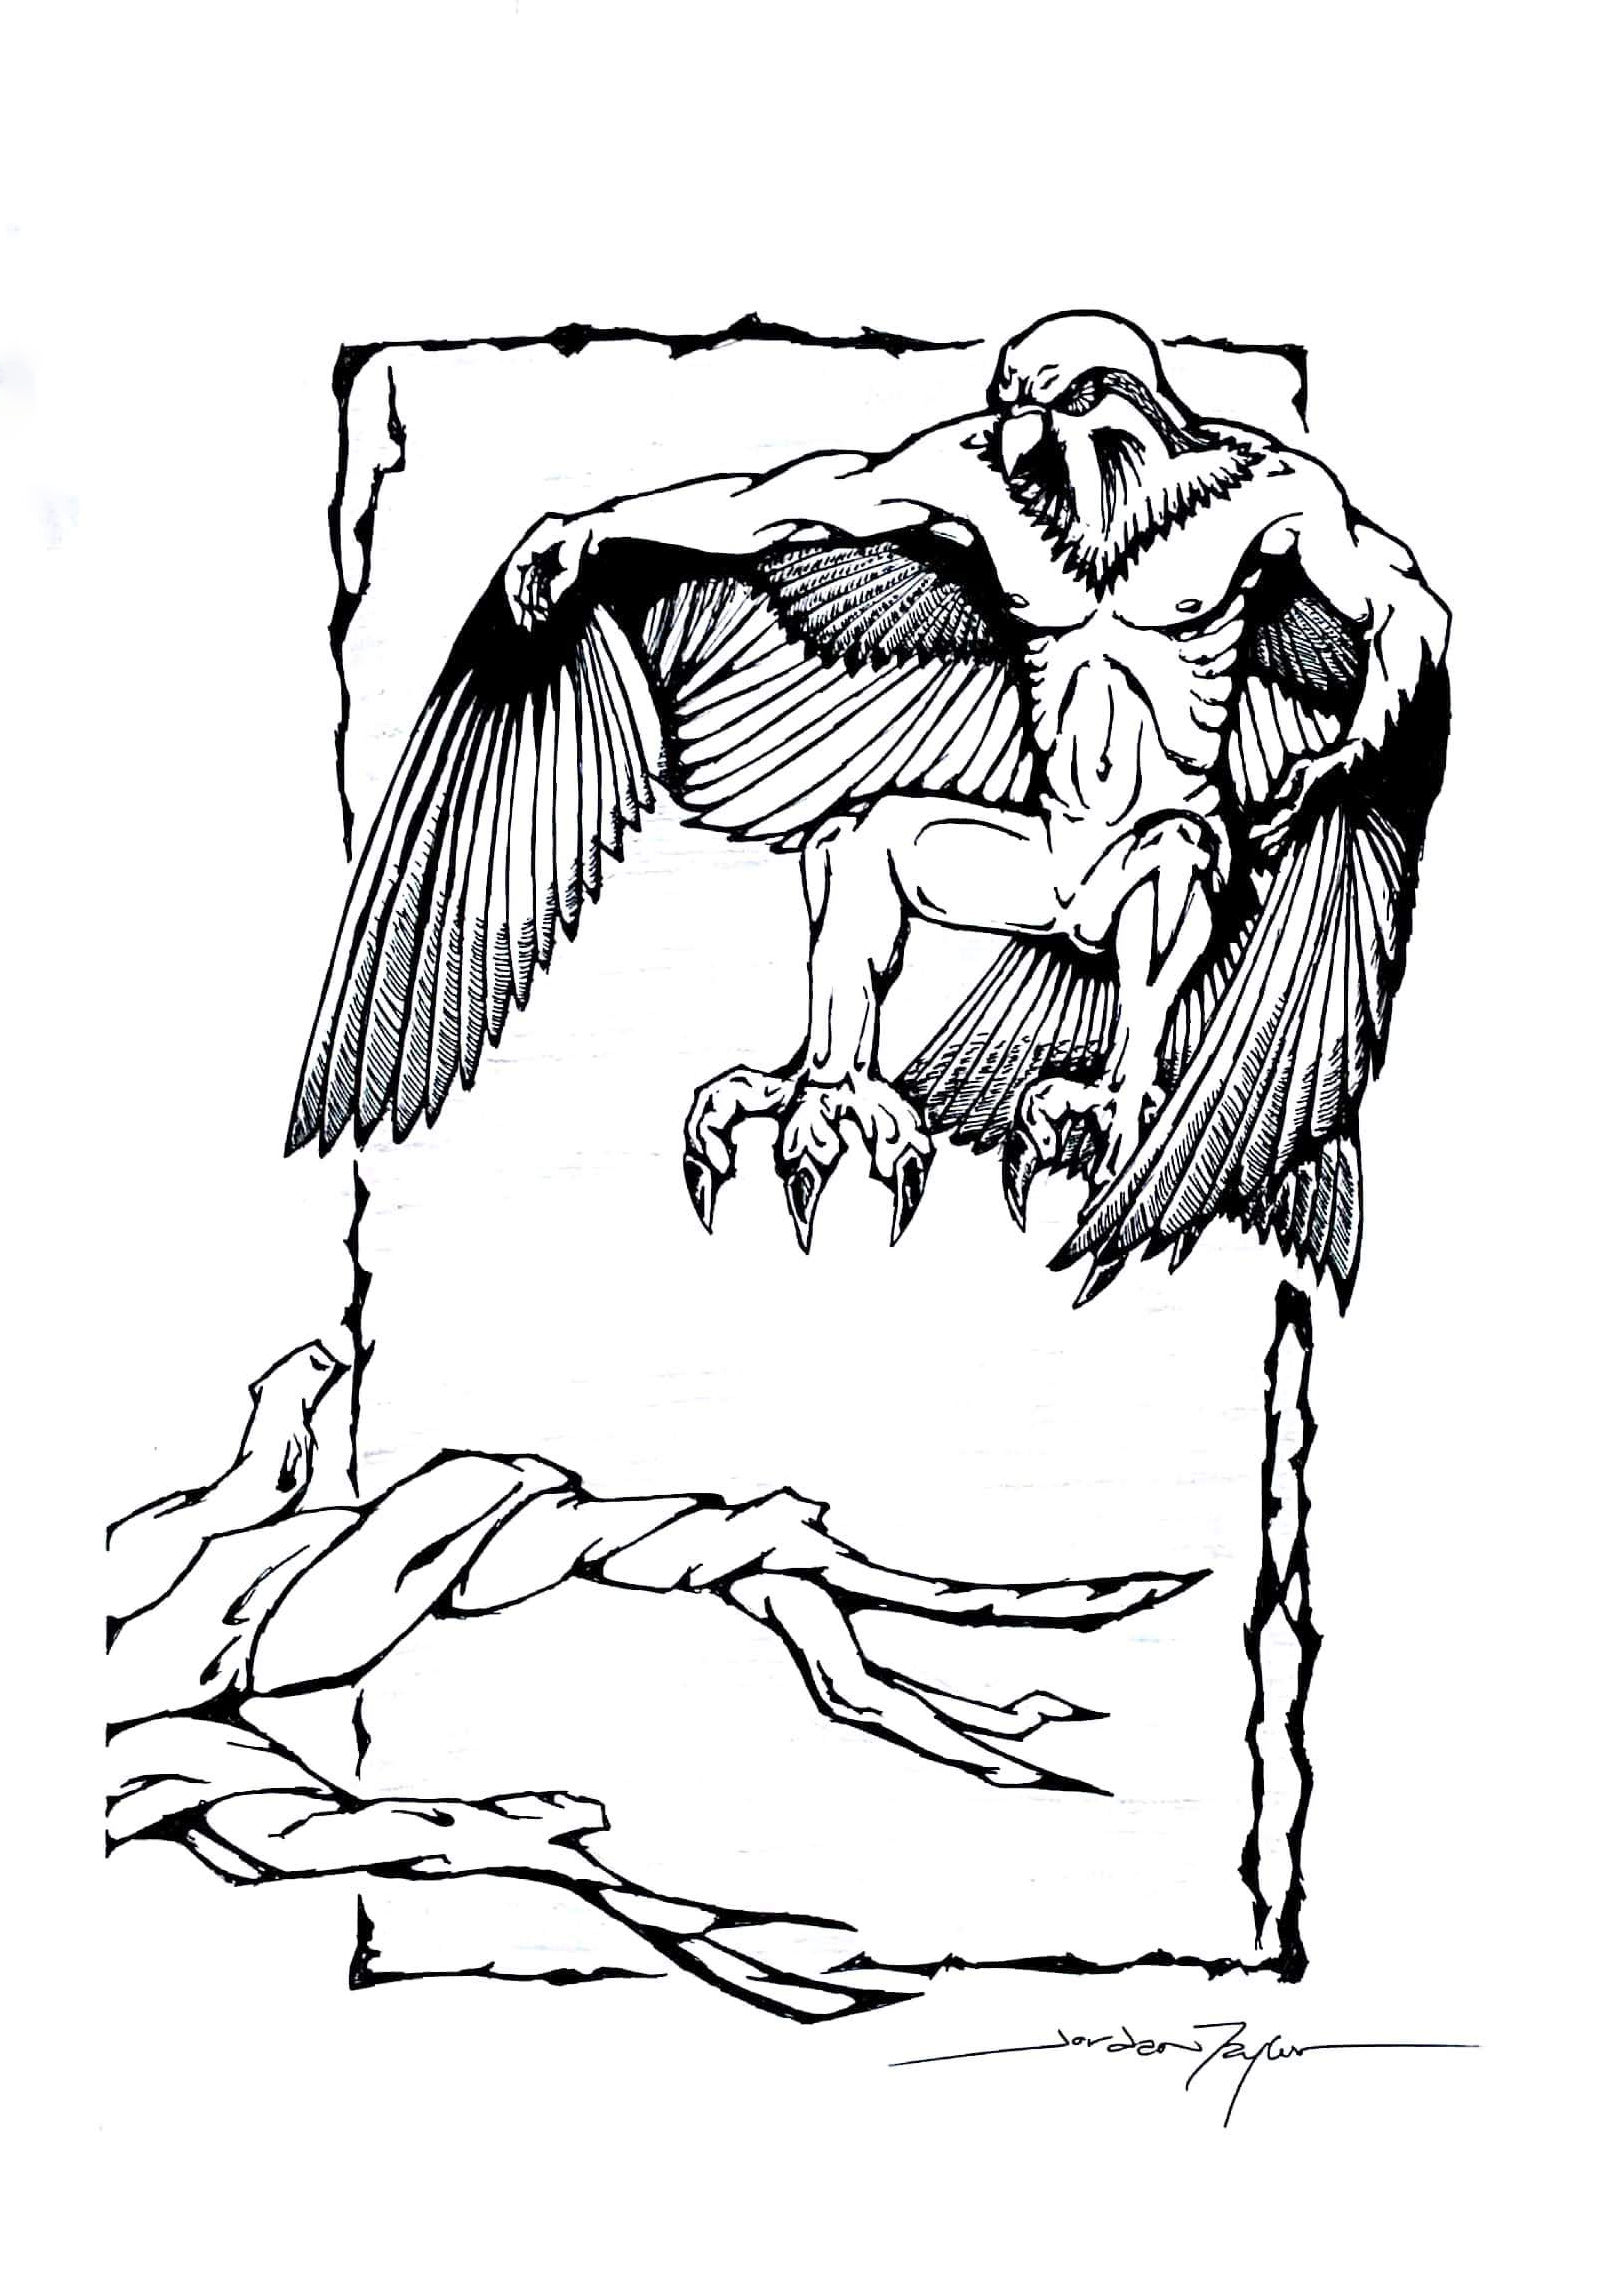 A man's torso with a falcon's head, wings, talons, and tail.